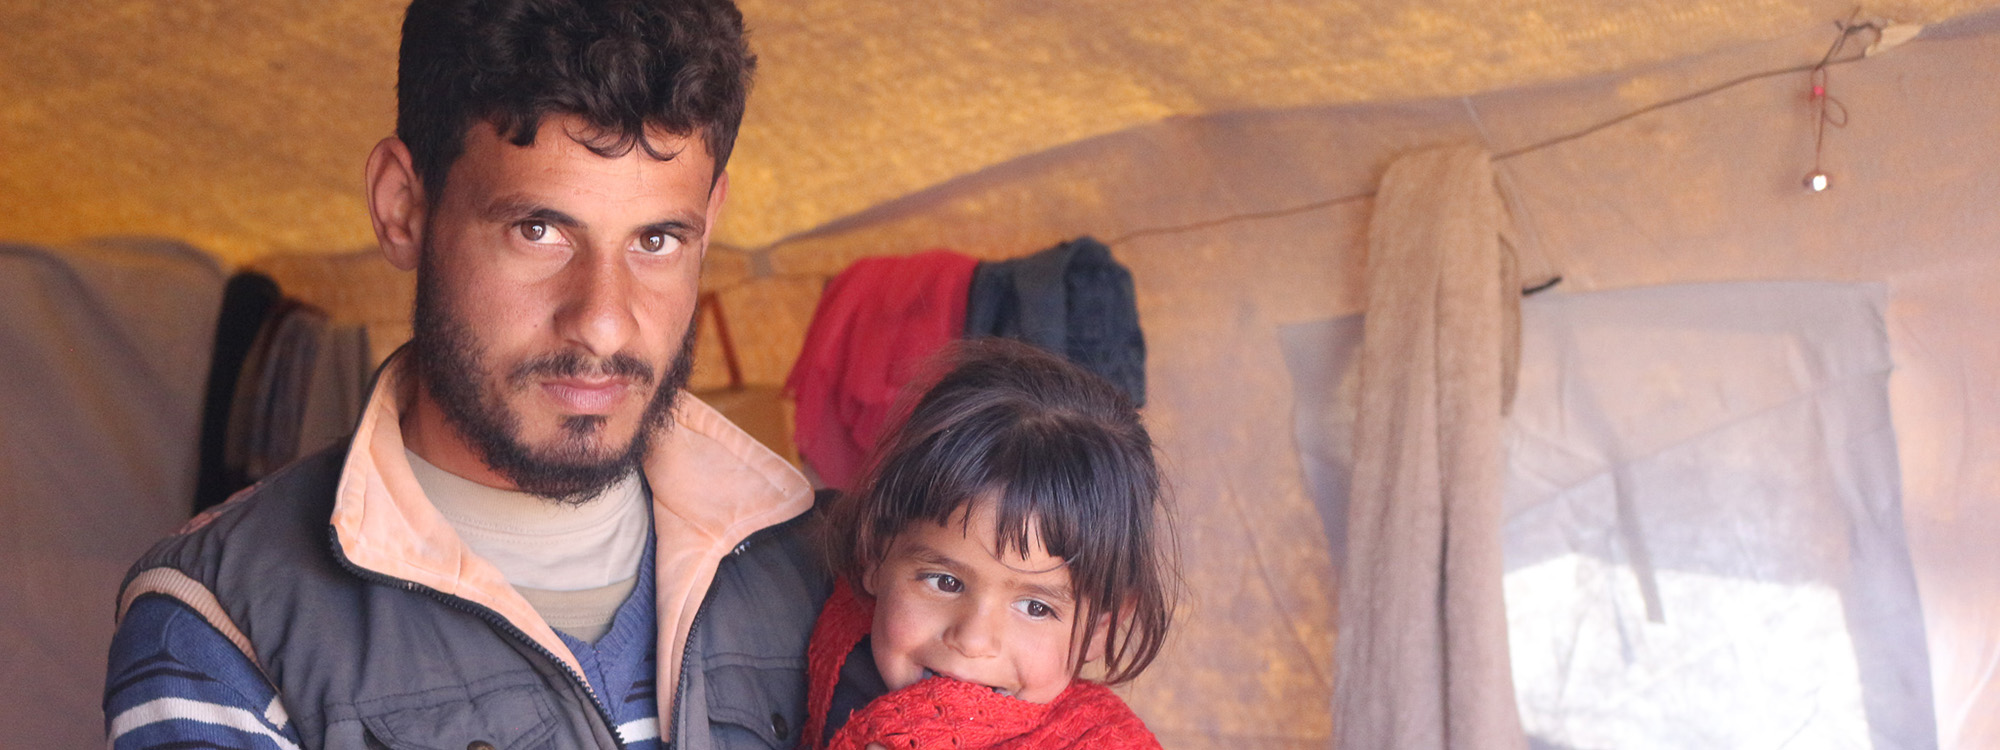 Man holding a child, both wearing winter clothes, inside a tent in Syria